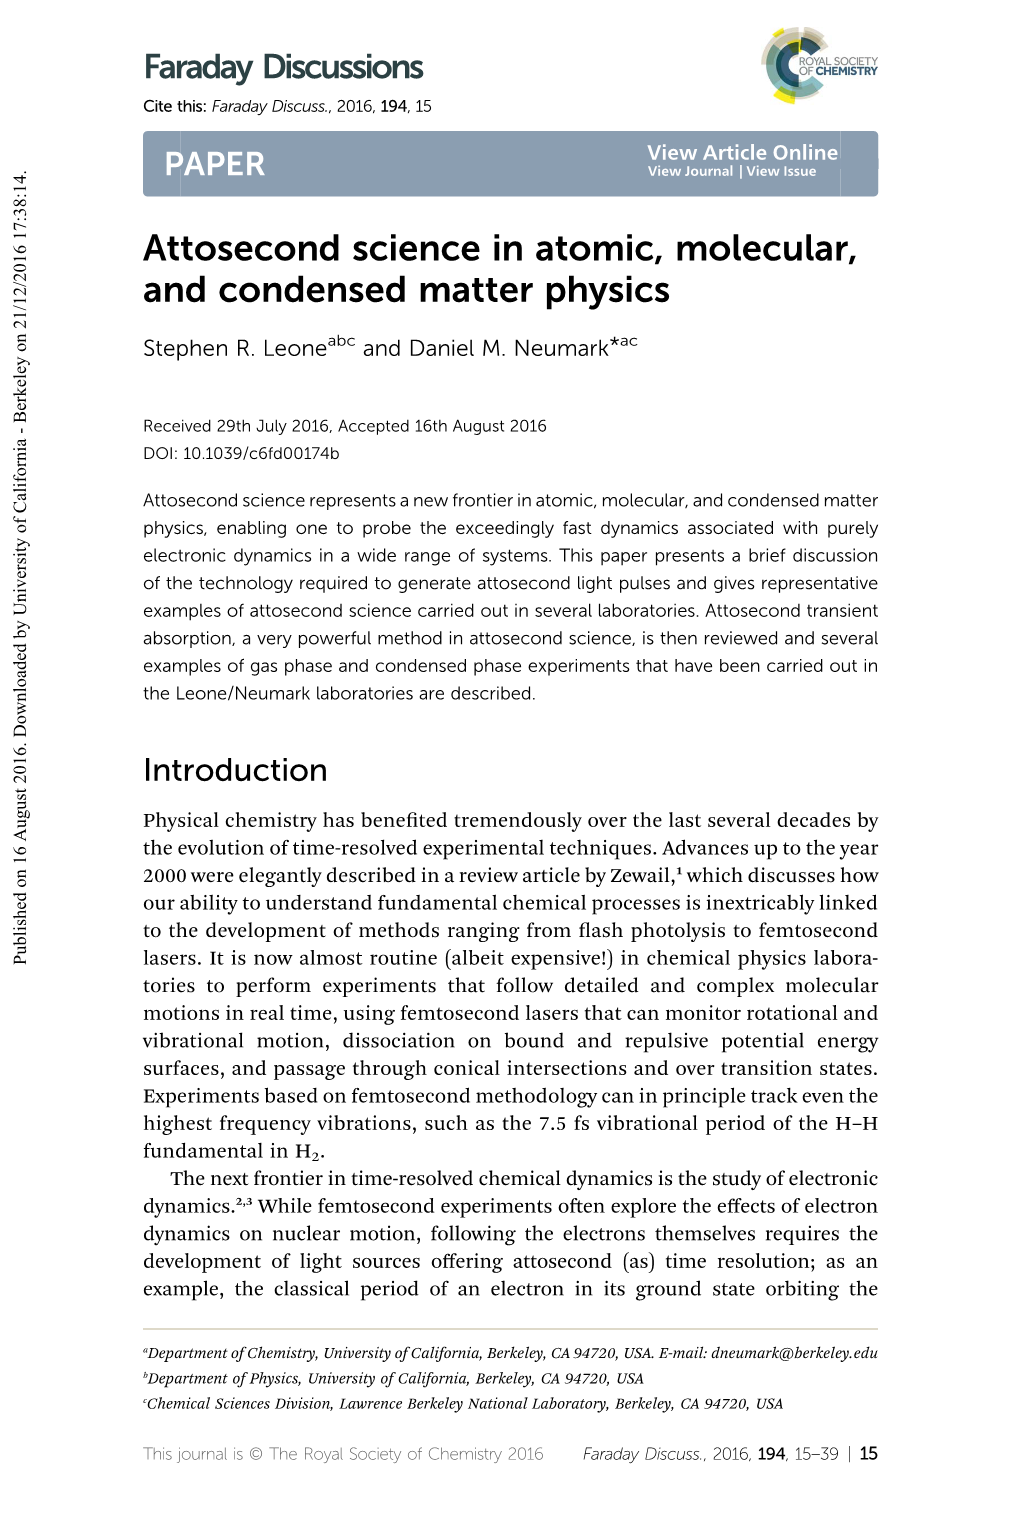 Attosecond Science in Atomic, Molecular, and Condensed Matter Physics